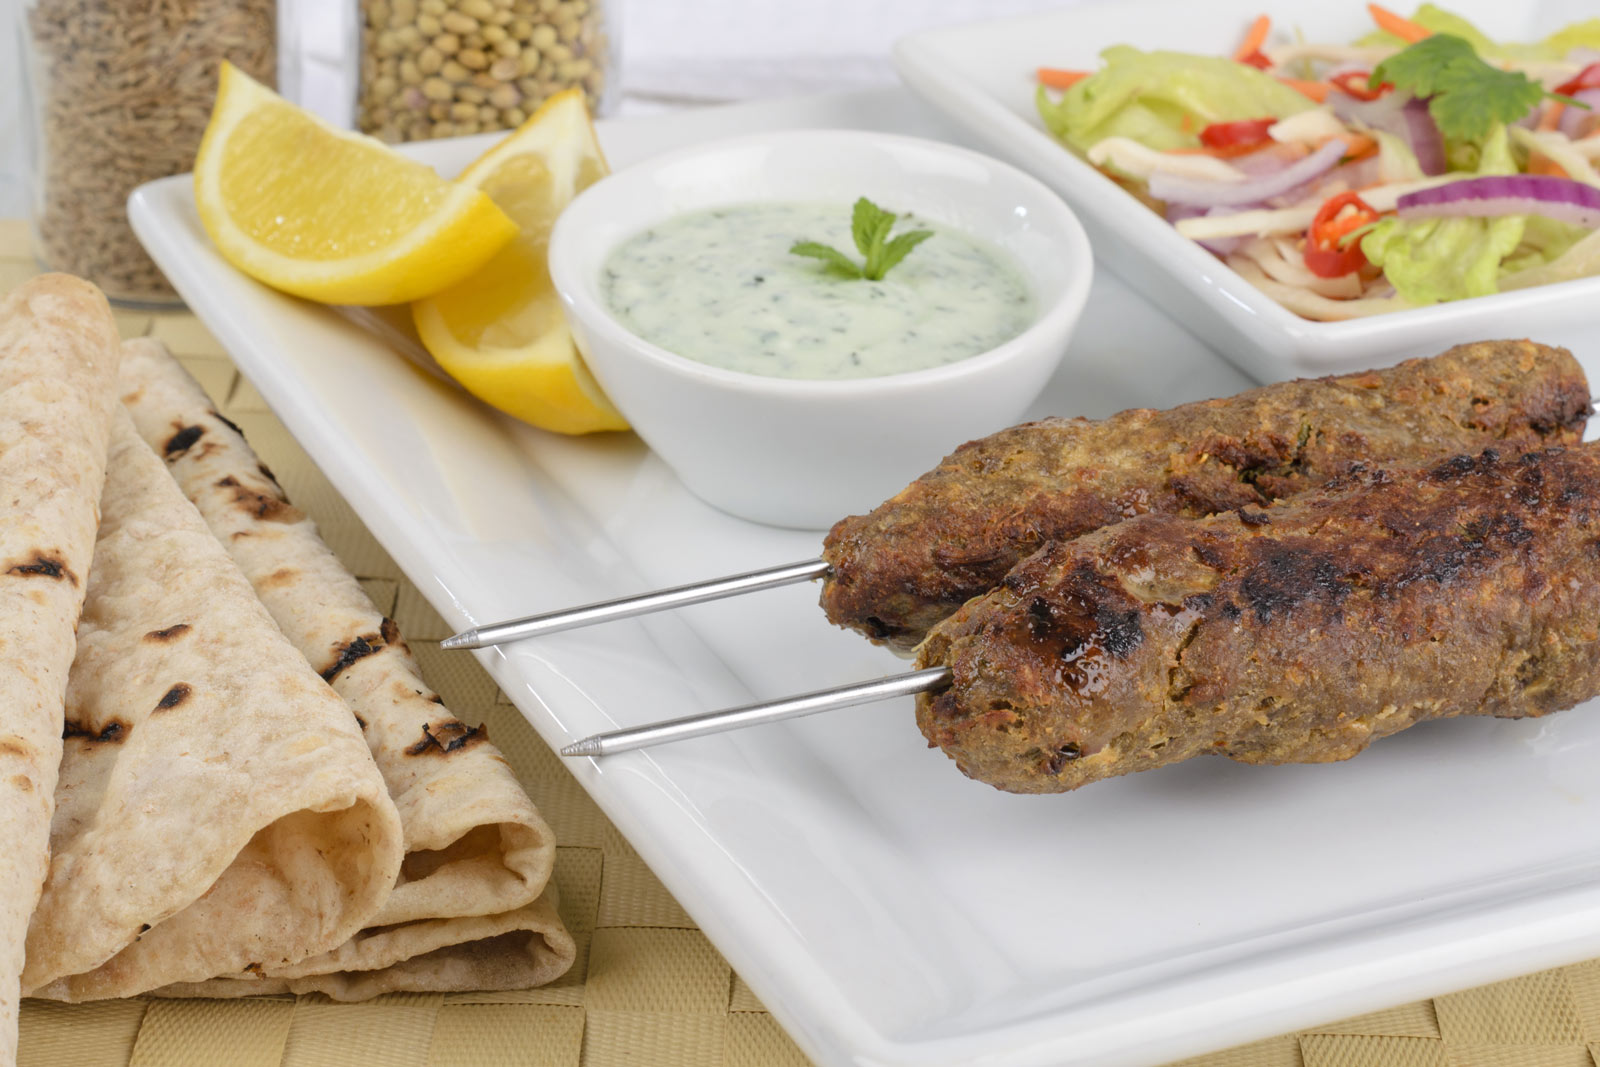 Kakori kebab and galauti kabab are traditional dishes with more than 100 years of history